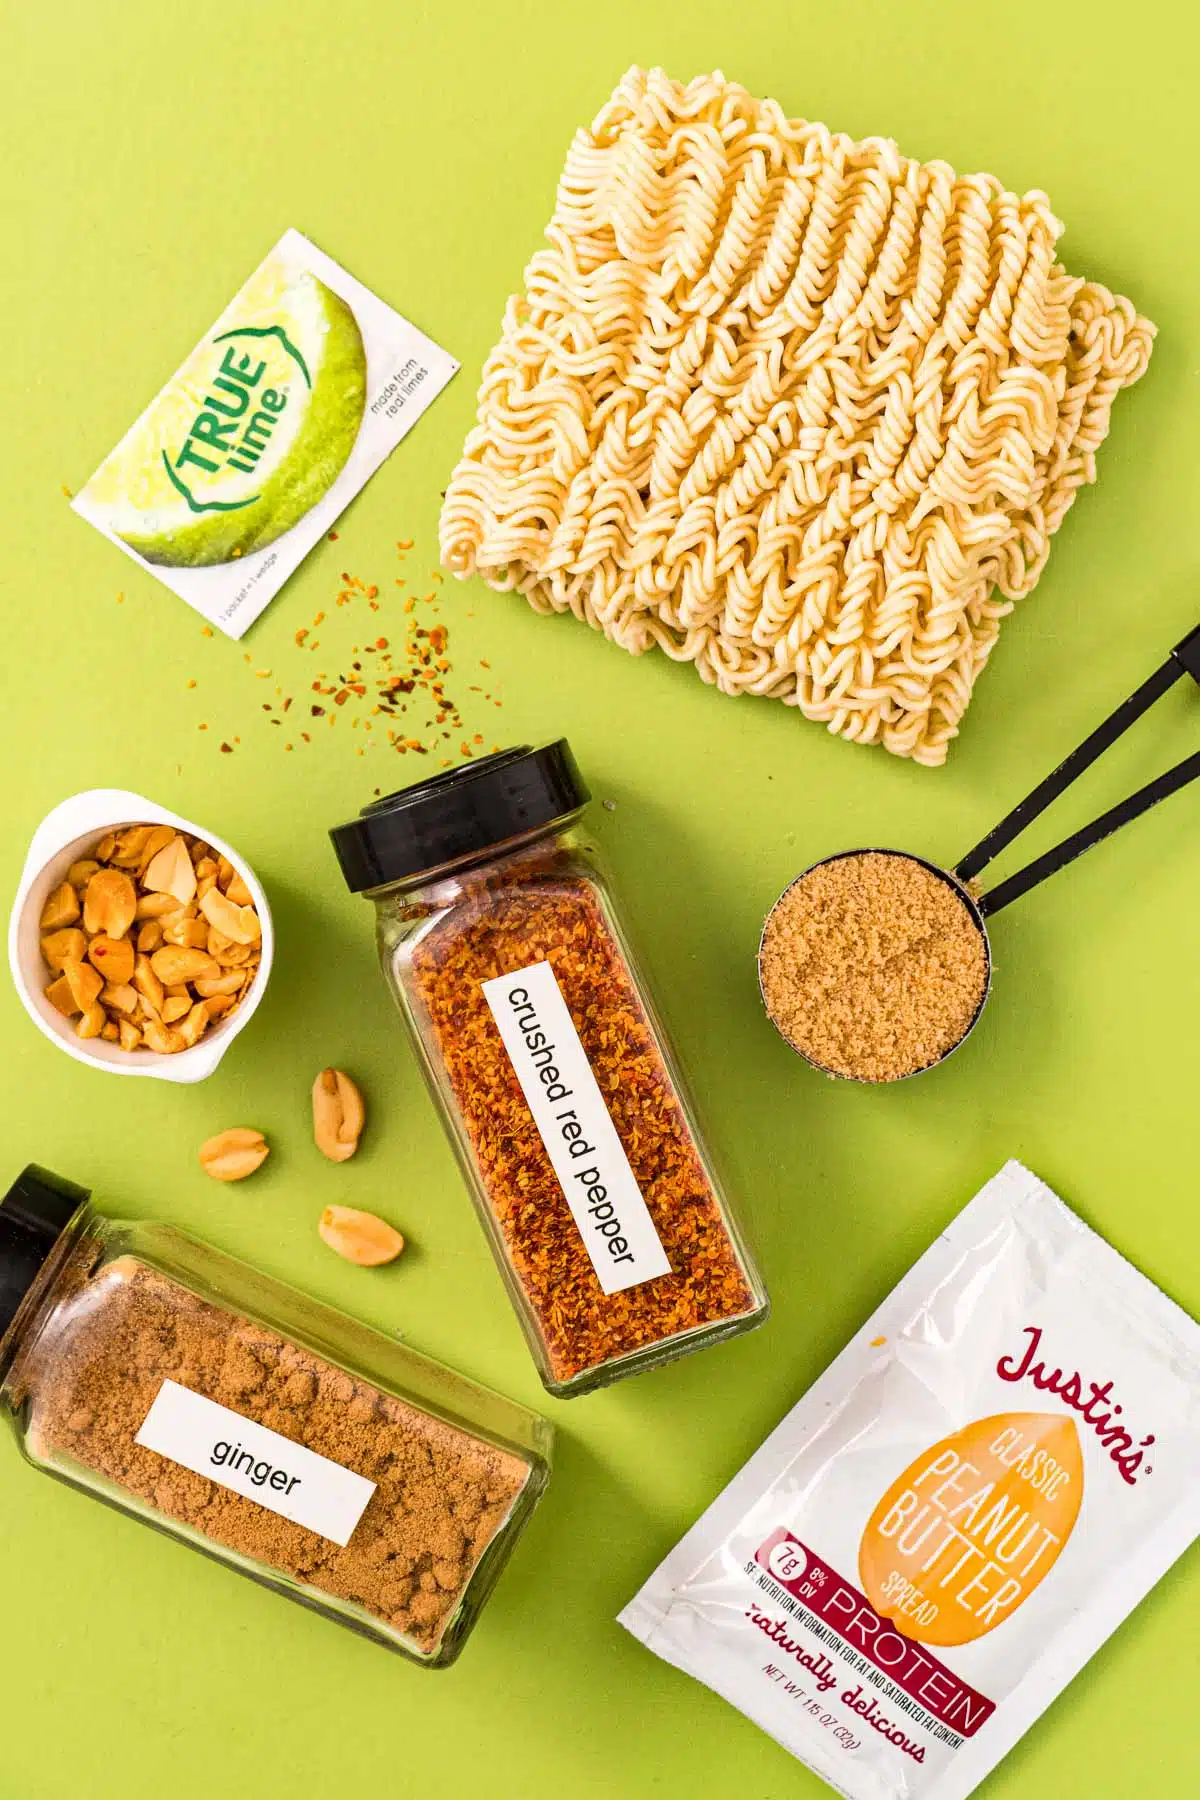 Dried ramen noodles, brown sugar, spice jars, peanuts, peanut butter packet, and true lime packet.